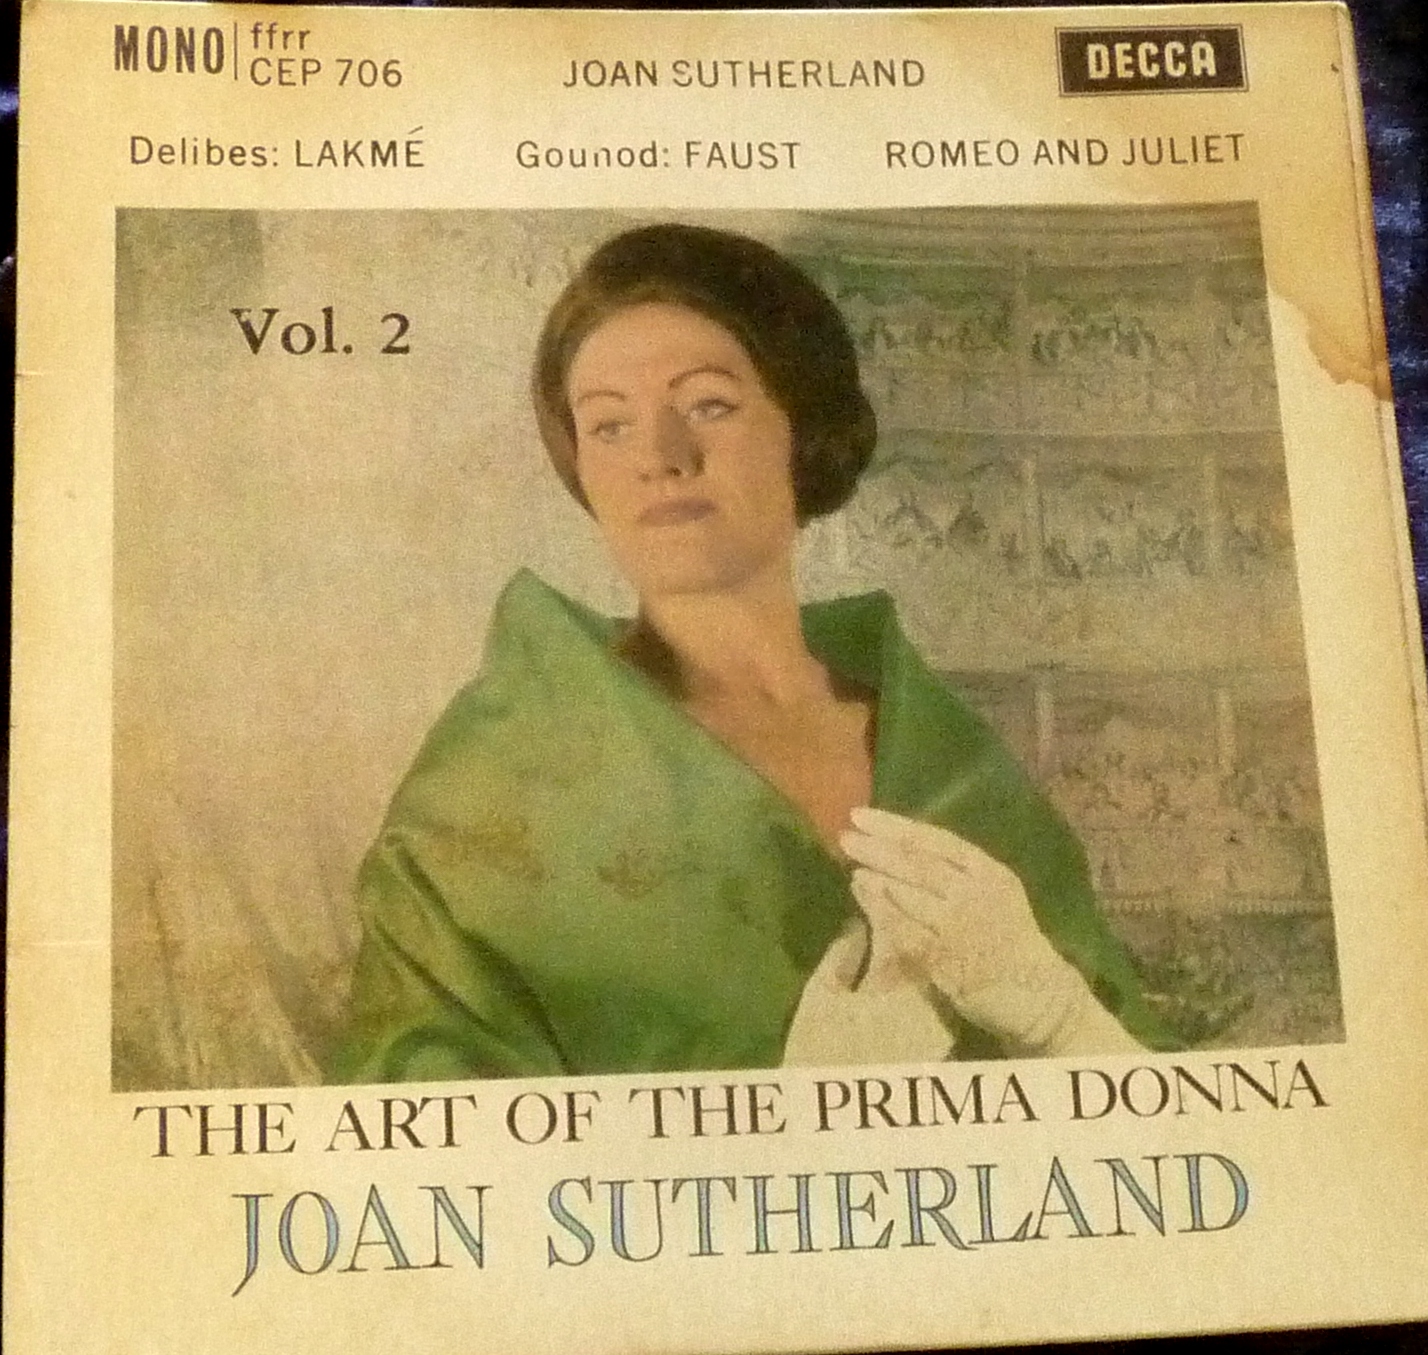 The Art of the Prima Donna No.2 - Joan Sutherland1428 x 1355